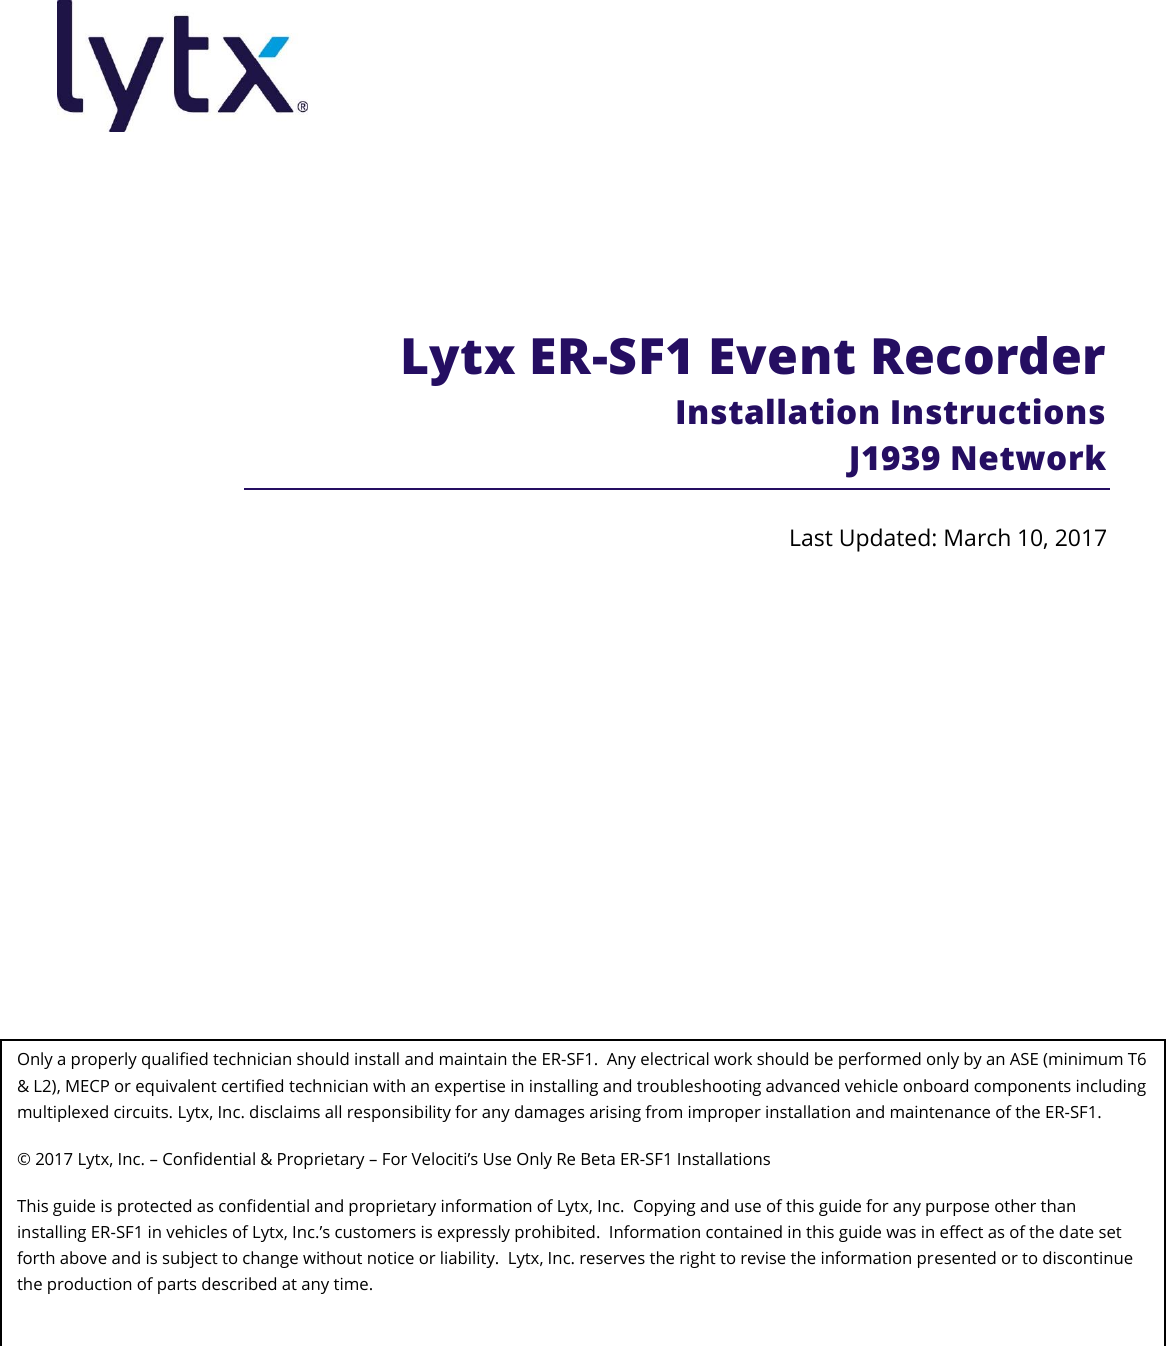                   Lytx ER-SF1 Event Recorder  Installation Instructions J1939 Network Last Updated: March 10, 2017 Only a properly qualified technician should install and maintain the ER-SF1.  Any electrical work should be performed only by an ASE (minimum T6 &amp; L2), MECP or equivalent certified technician with an expertise in installing and troubleshooting advanced vehicle onboard components including multiplexed circuits. Lytx, Inc. disclaims all responsibility for any damages arising from improper installation and maintenance of the ER-SF1. © 2017 Lytx, Inc. – Confidential &amp; Proprietary – For Velociti’s Use Only Re Beta ER-SF1 Installations This guide is protected as confidential and proprietary information of Lytx, Inc.  Copying and use of this guide for any purpose other than installing ER-SF1 in vehicles of Lytx, Inc.’s customers is expressly prohibited.  Information contained in this guide was in effect as of the date set forth above and is subject to change without notice or liability.  Lytx, Inc. reserves the right to revise the information presented or to discontinue the production of parts described at any time.  